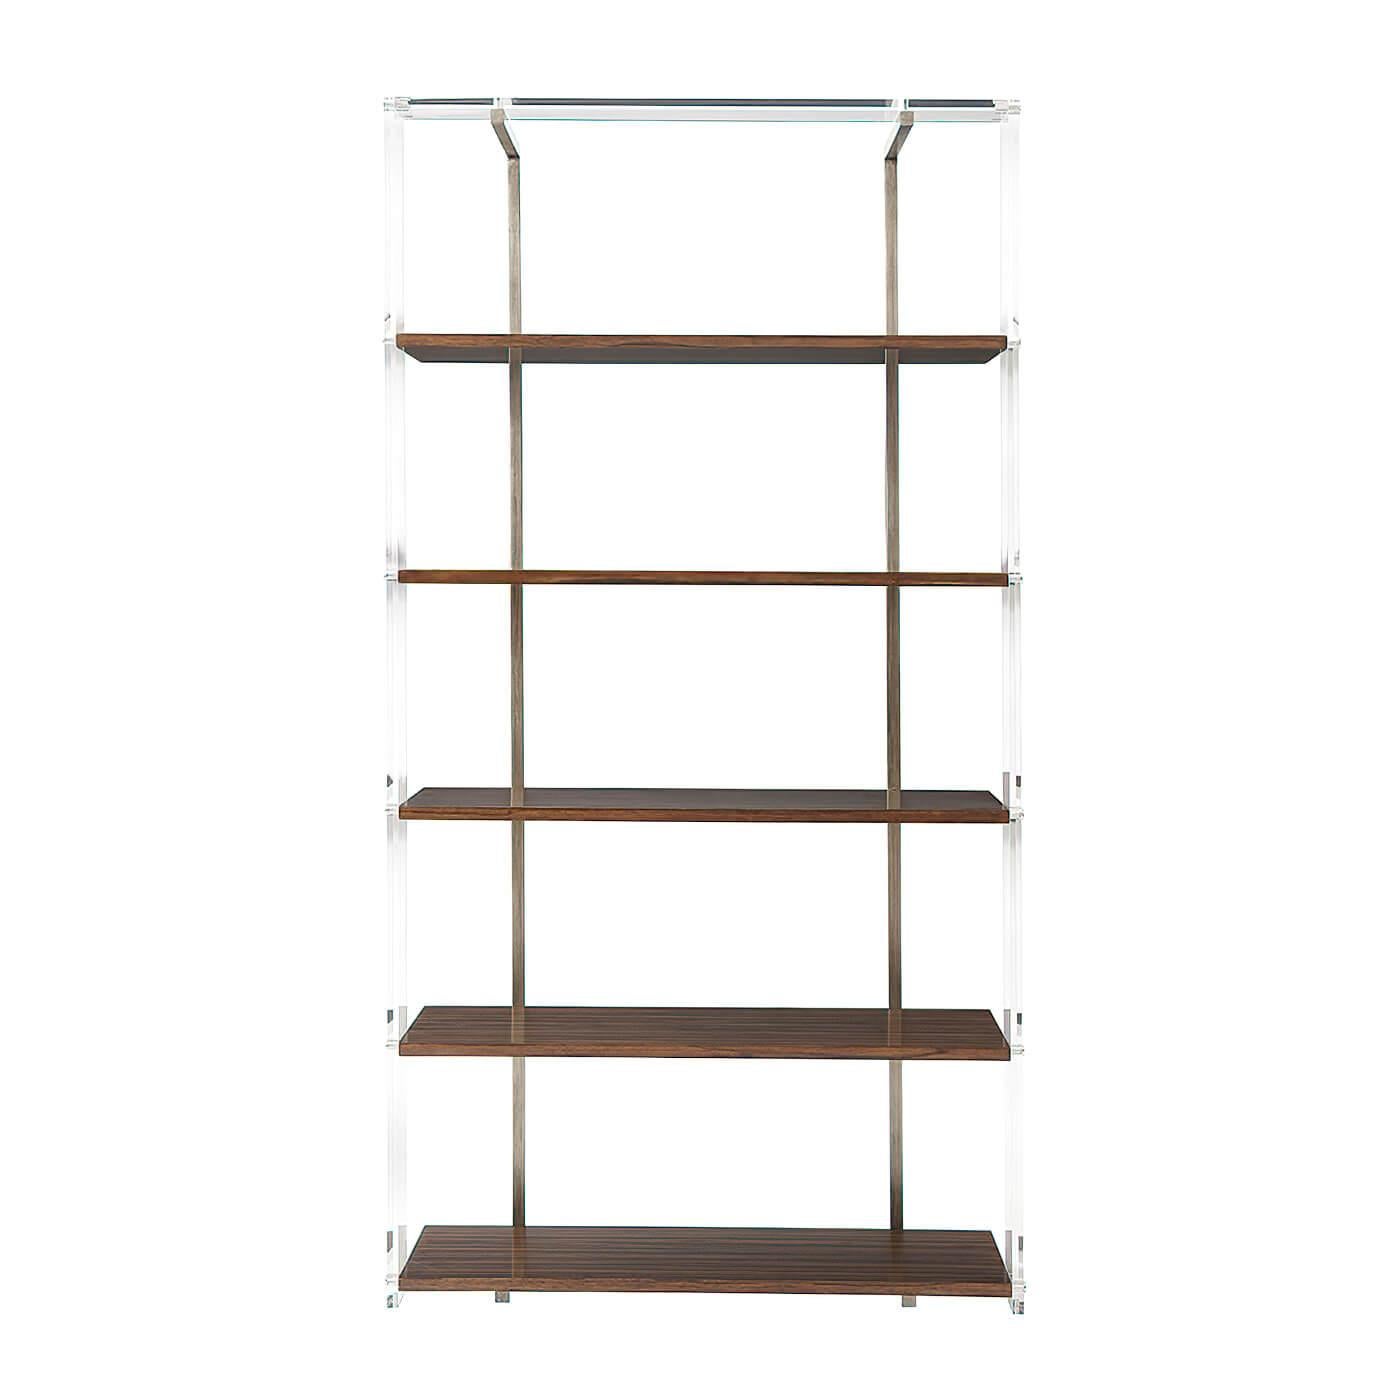 A modern lucite and ofram veneer etagere with stainless steel bold details. This piece has a sleek clear acrylic frame with five shelves. It is accented with vintage pewter steel vertical supports. 
Dimensions
43.25